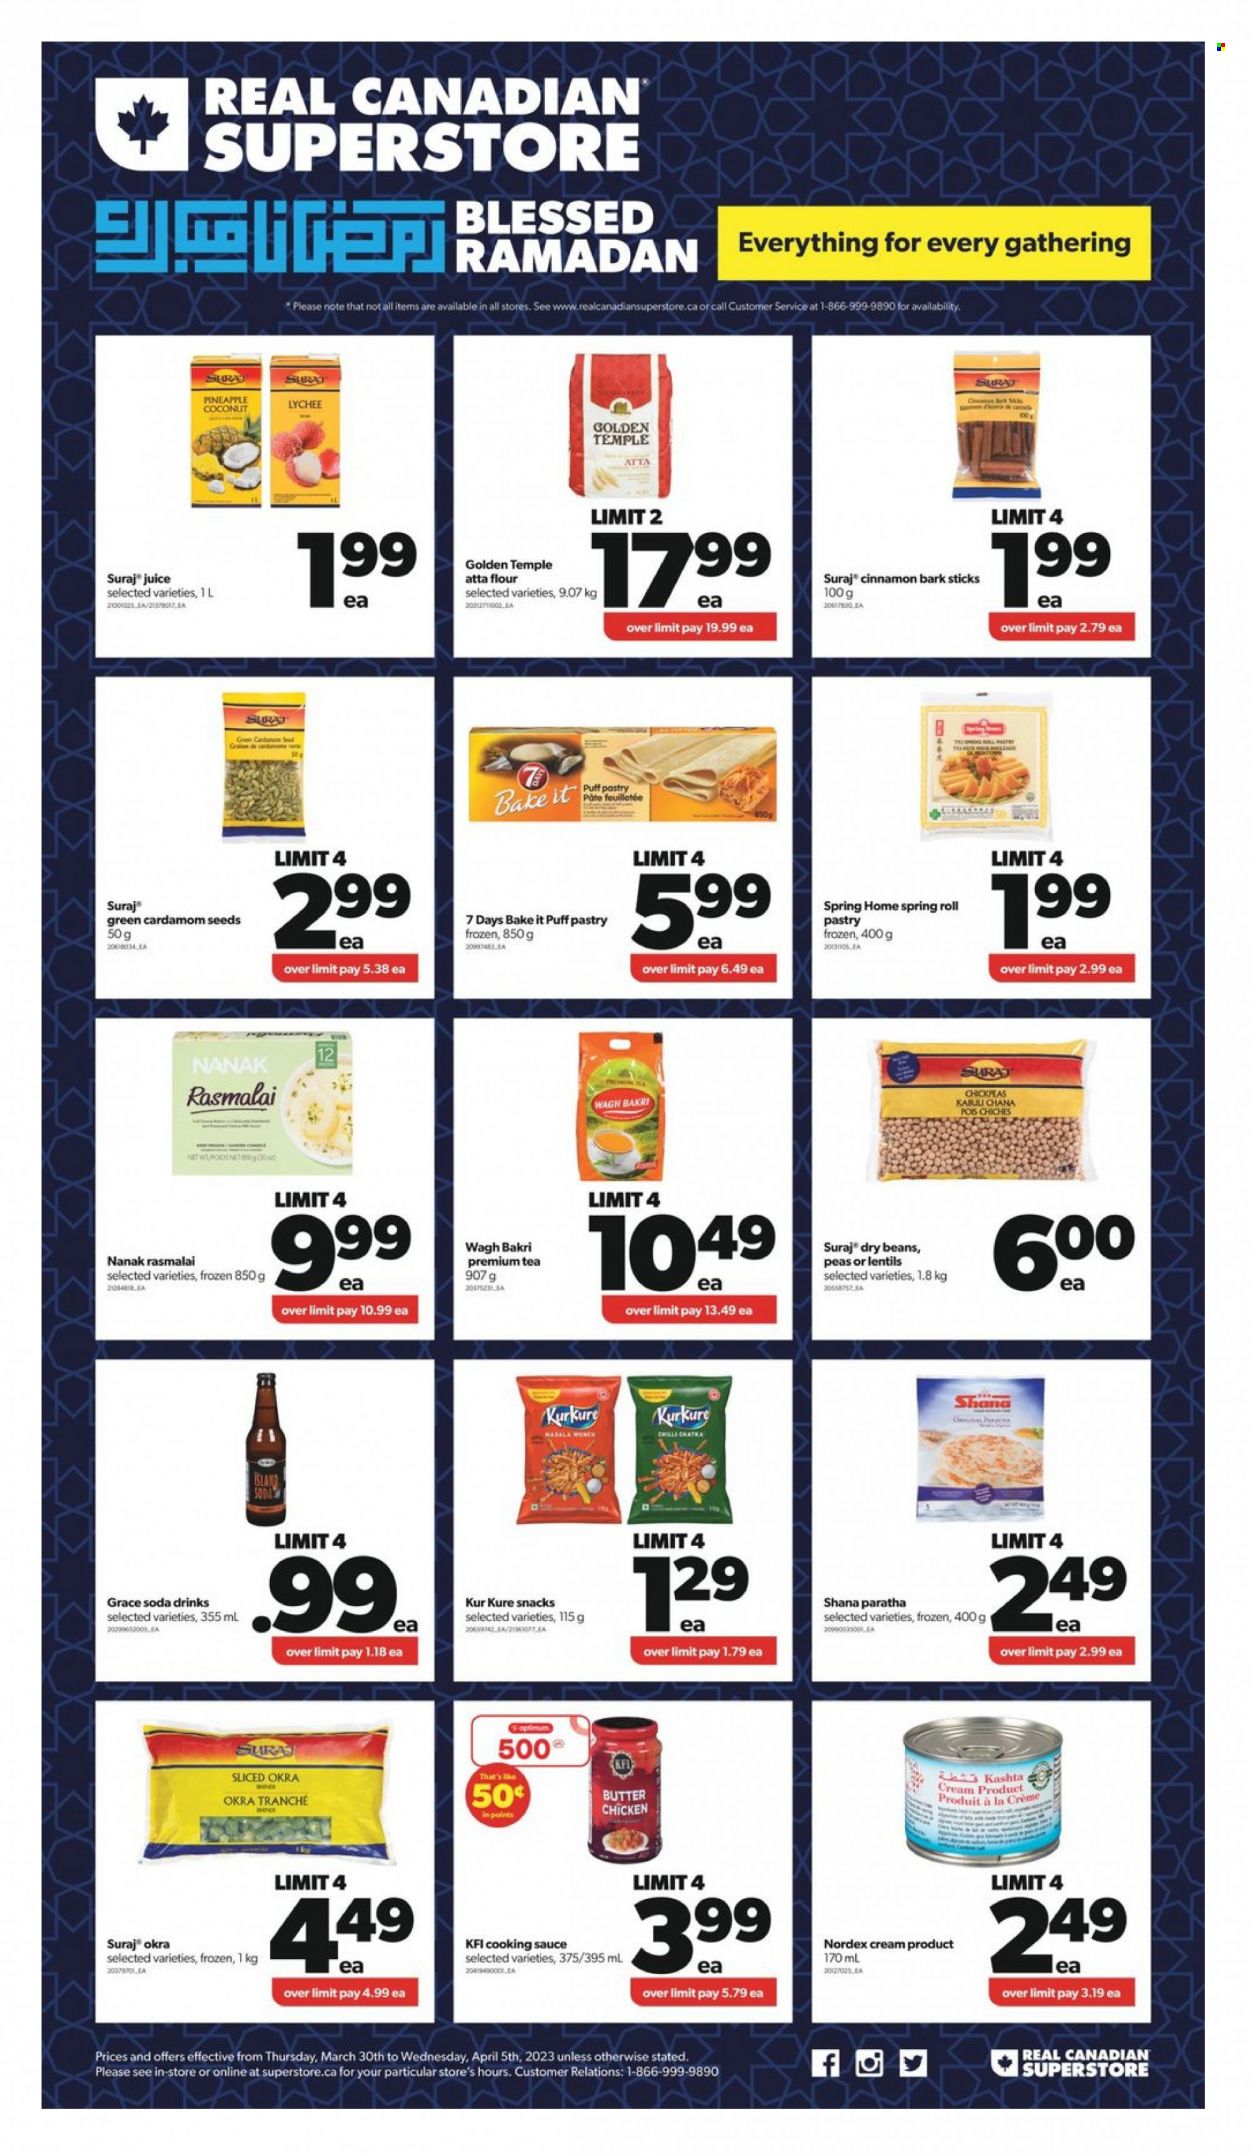 thumbnail - Real Canadian Superstore Flyer - March 30, 2023 - April 05, 2023 - Sales products - peas, okra, lychee, pineapple, coconut, sauce, puff pastry, snack, 7 Days, flour, lentils, chickpeas, dry beans, cinnamon, juice, soda, tea, chicken, Optimum. Page 1.